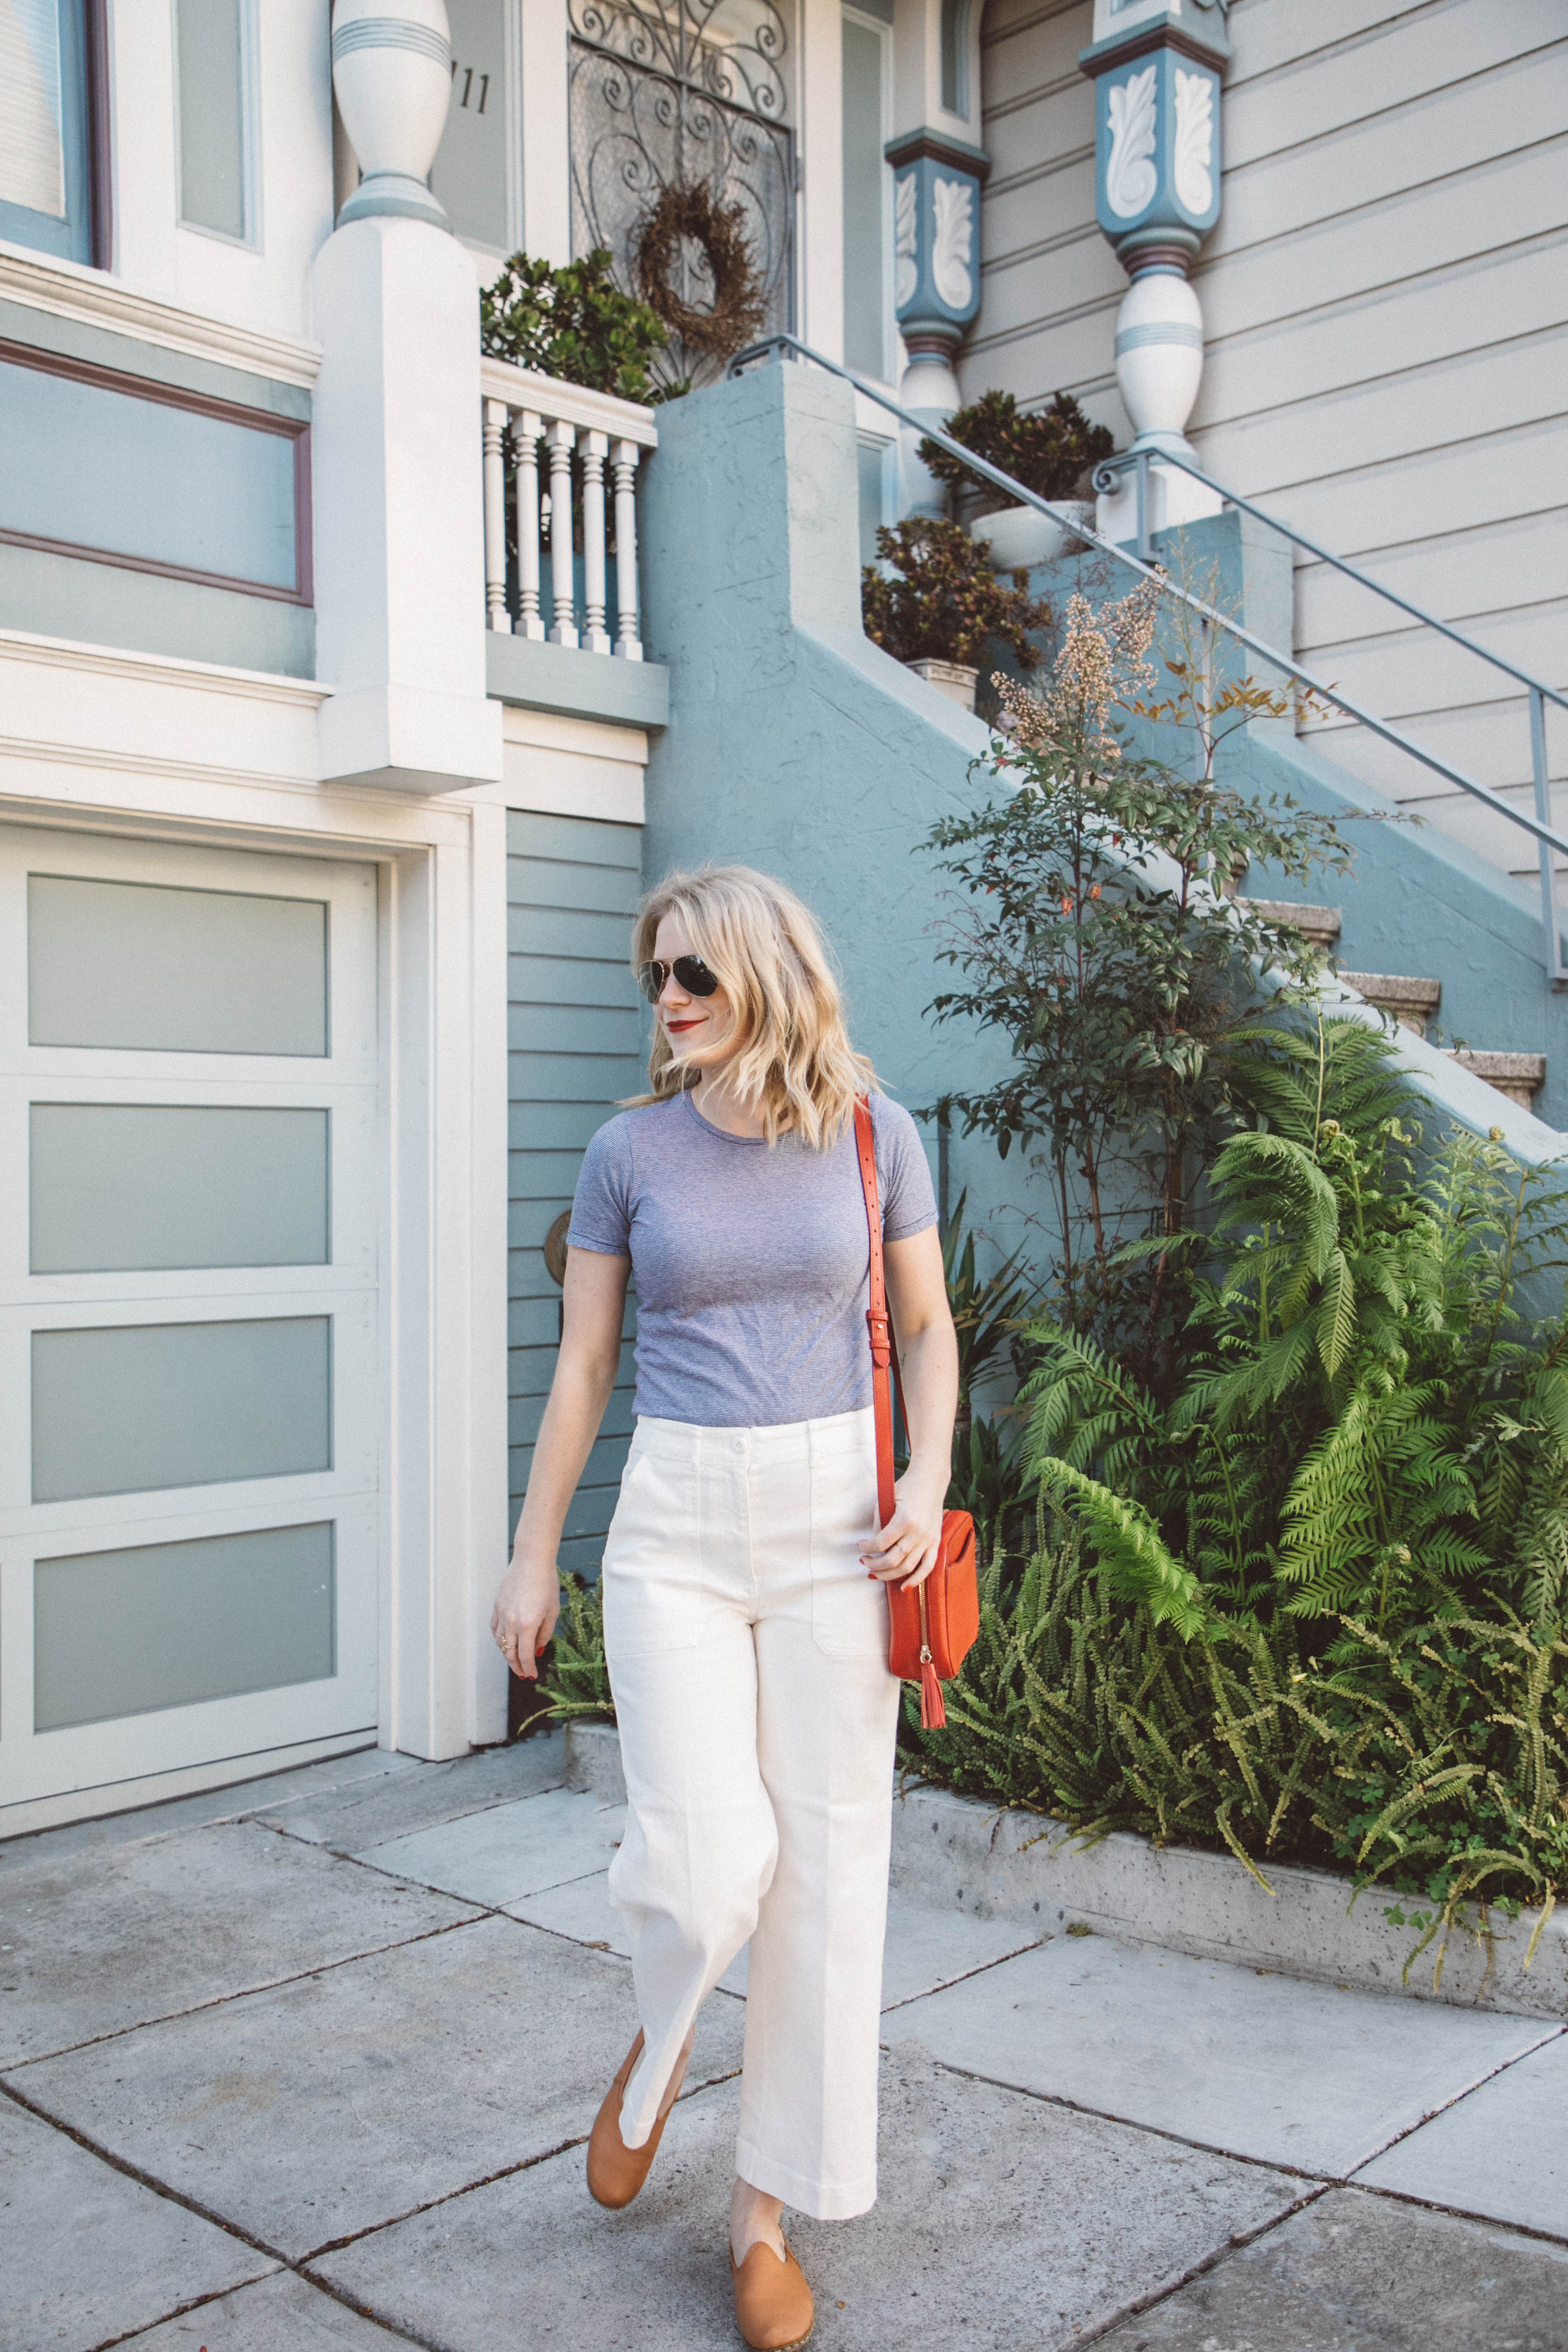 Everlane Wide Leg Crop Pants paired with an Everlane Striped Tee makes for the perfect early summer look.